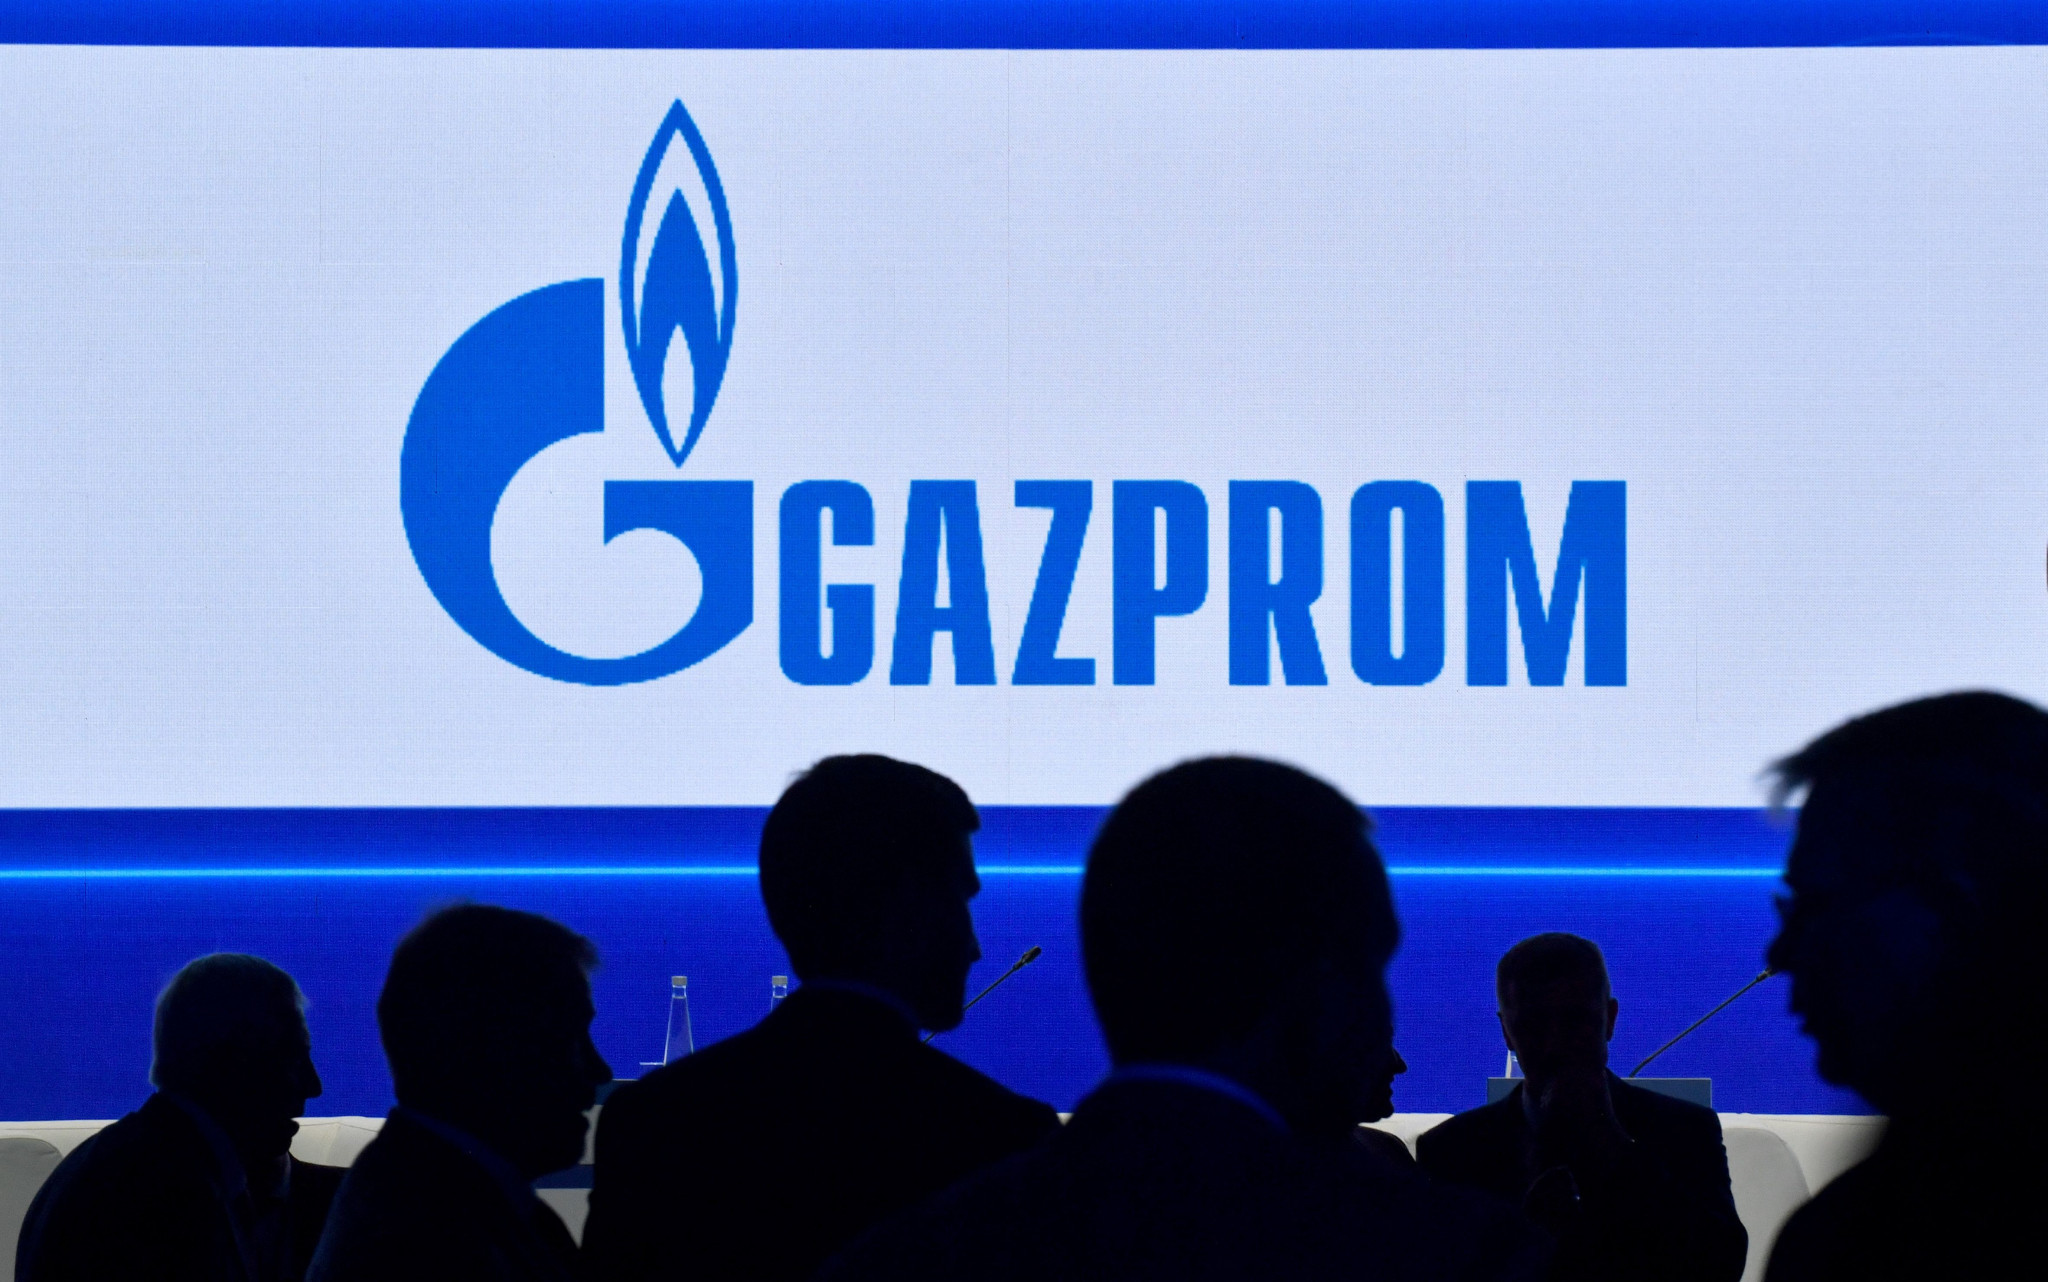 A controversial sponsorship agreement with Gazprom has allegedly stabilised the IBA's finances ©Getty Images